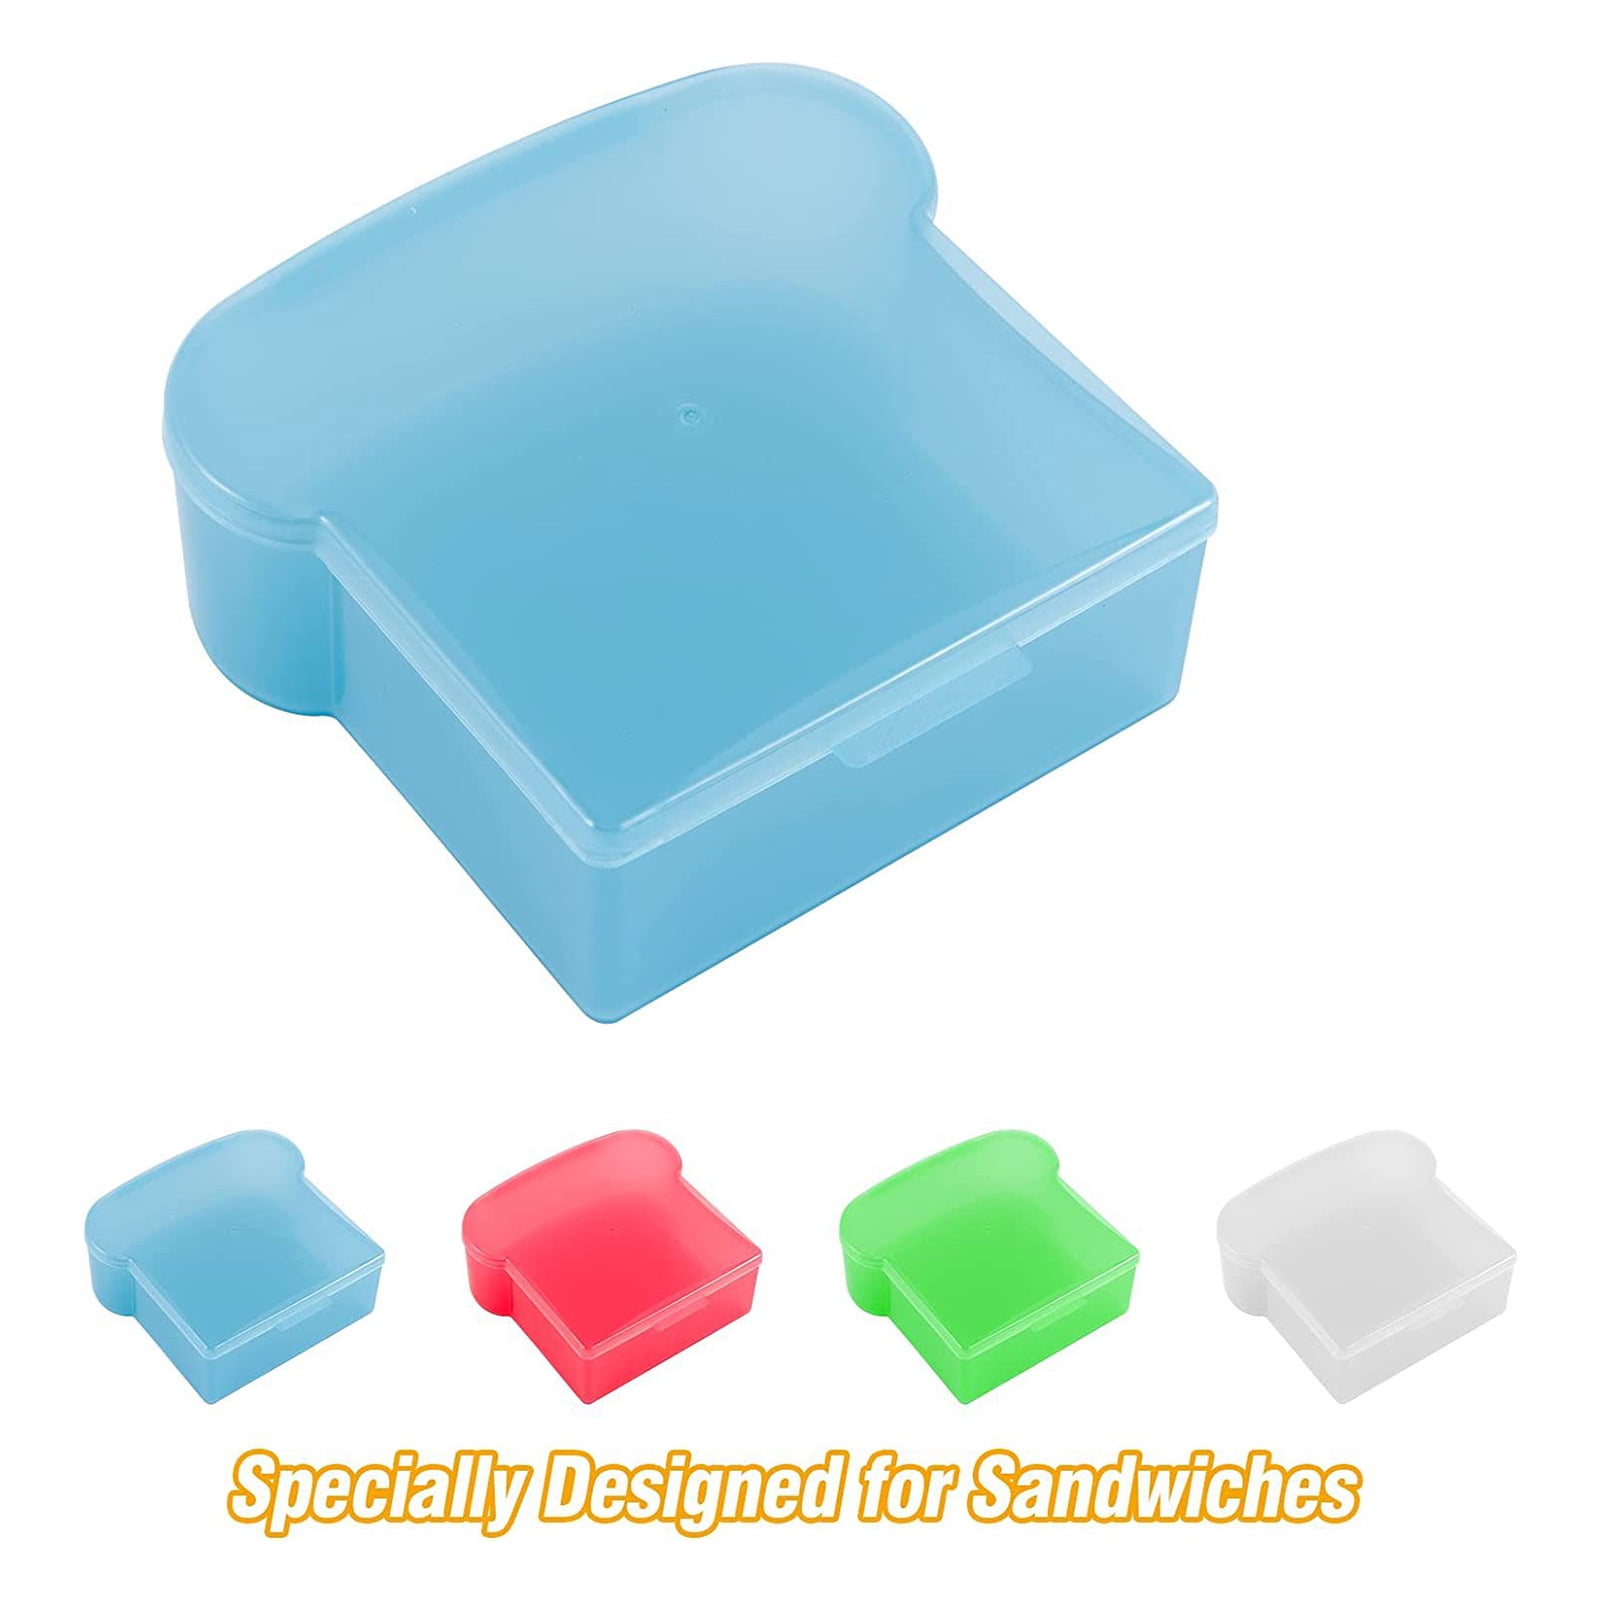 Pjtewawe Food Storage Sandwich Containers Sandwich Box Food Storage Shape  Holder For Lunch Boxes Bread Sandwich For Kids Adults Prep Microwave  Dishwasher 